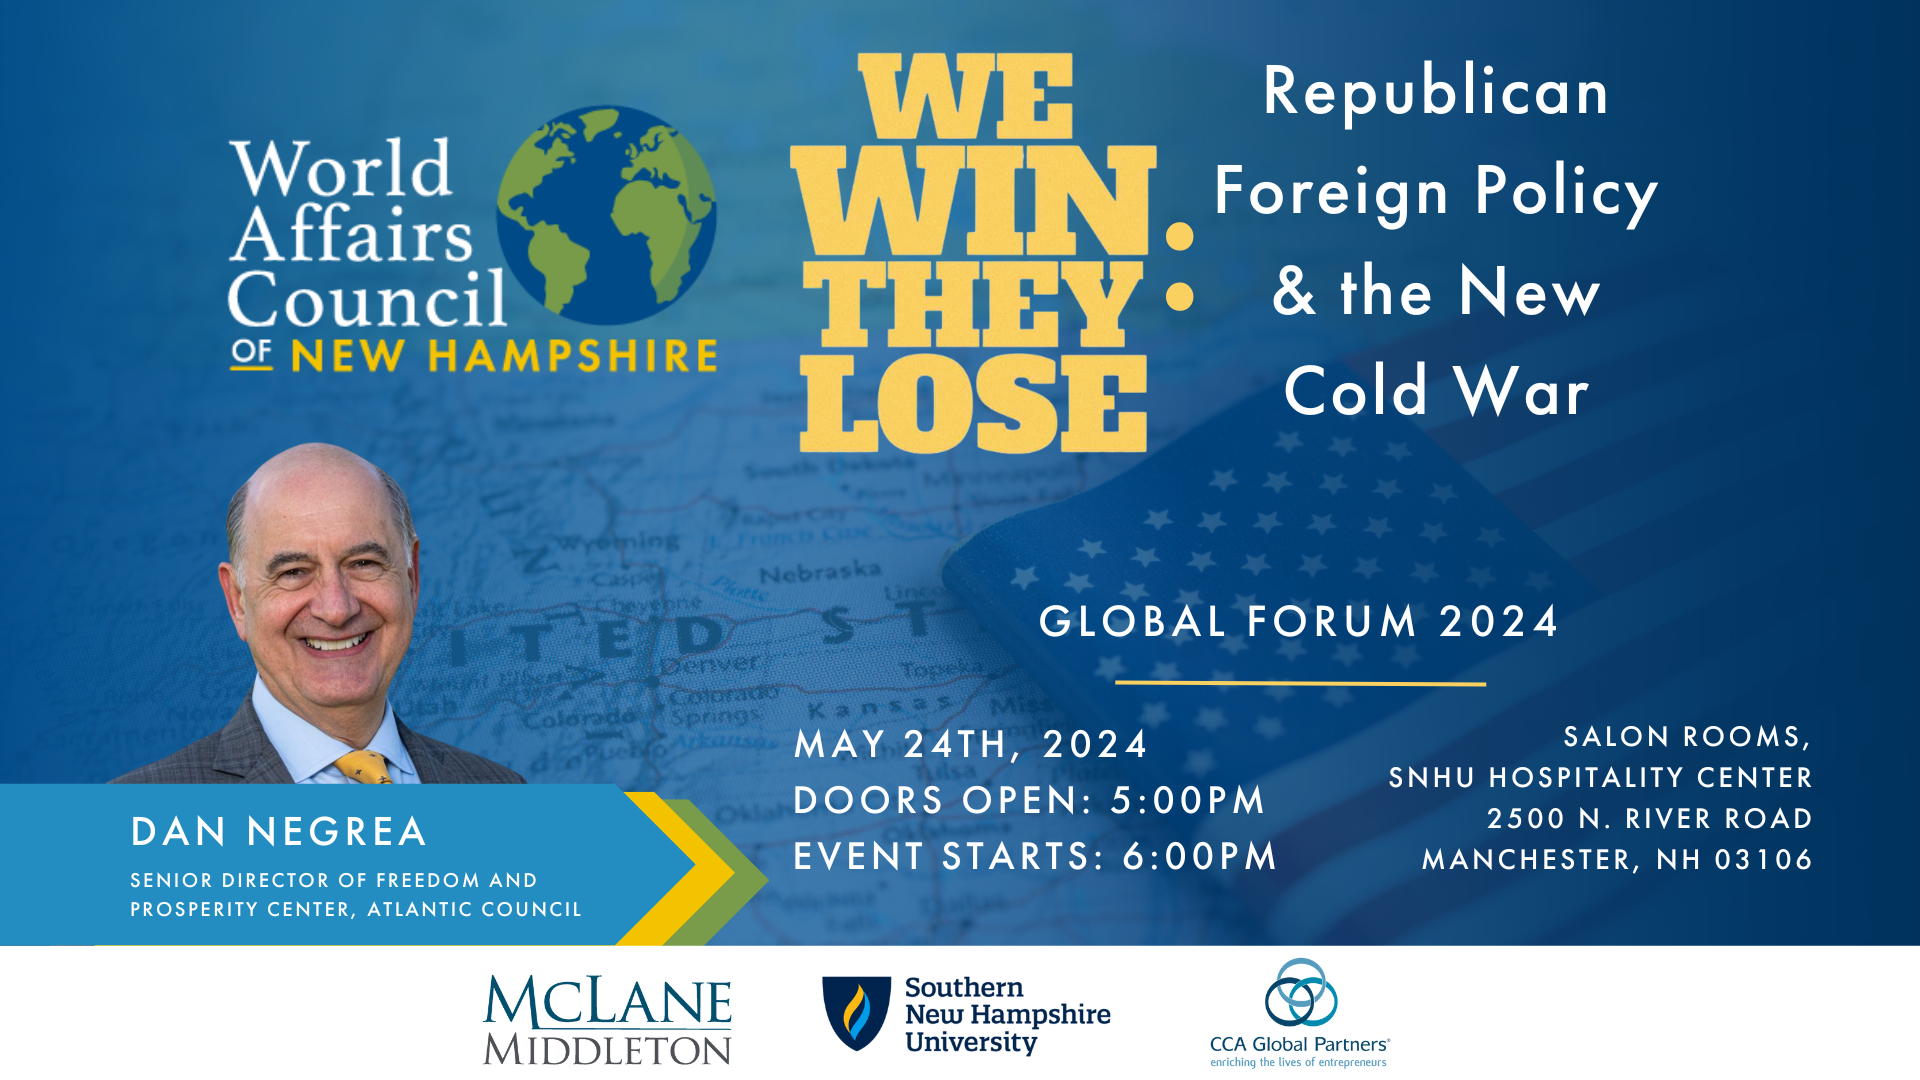 Global Forum 2024: Republican Foreign Policy & the New Cold War